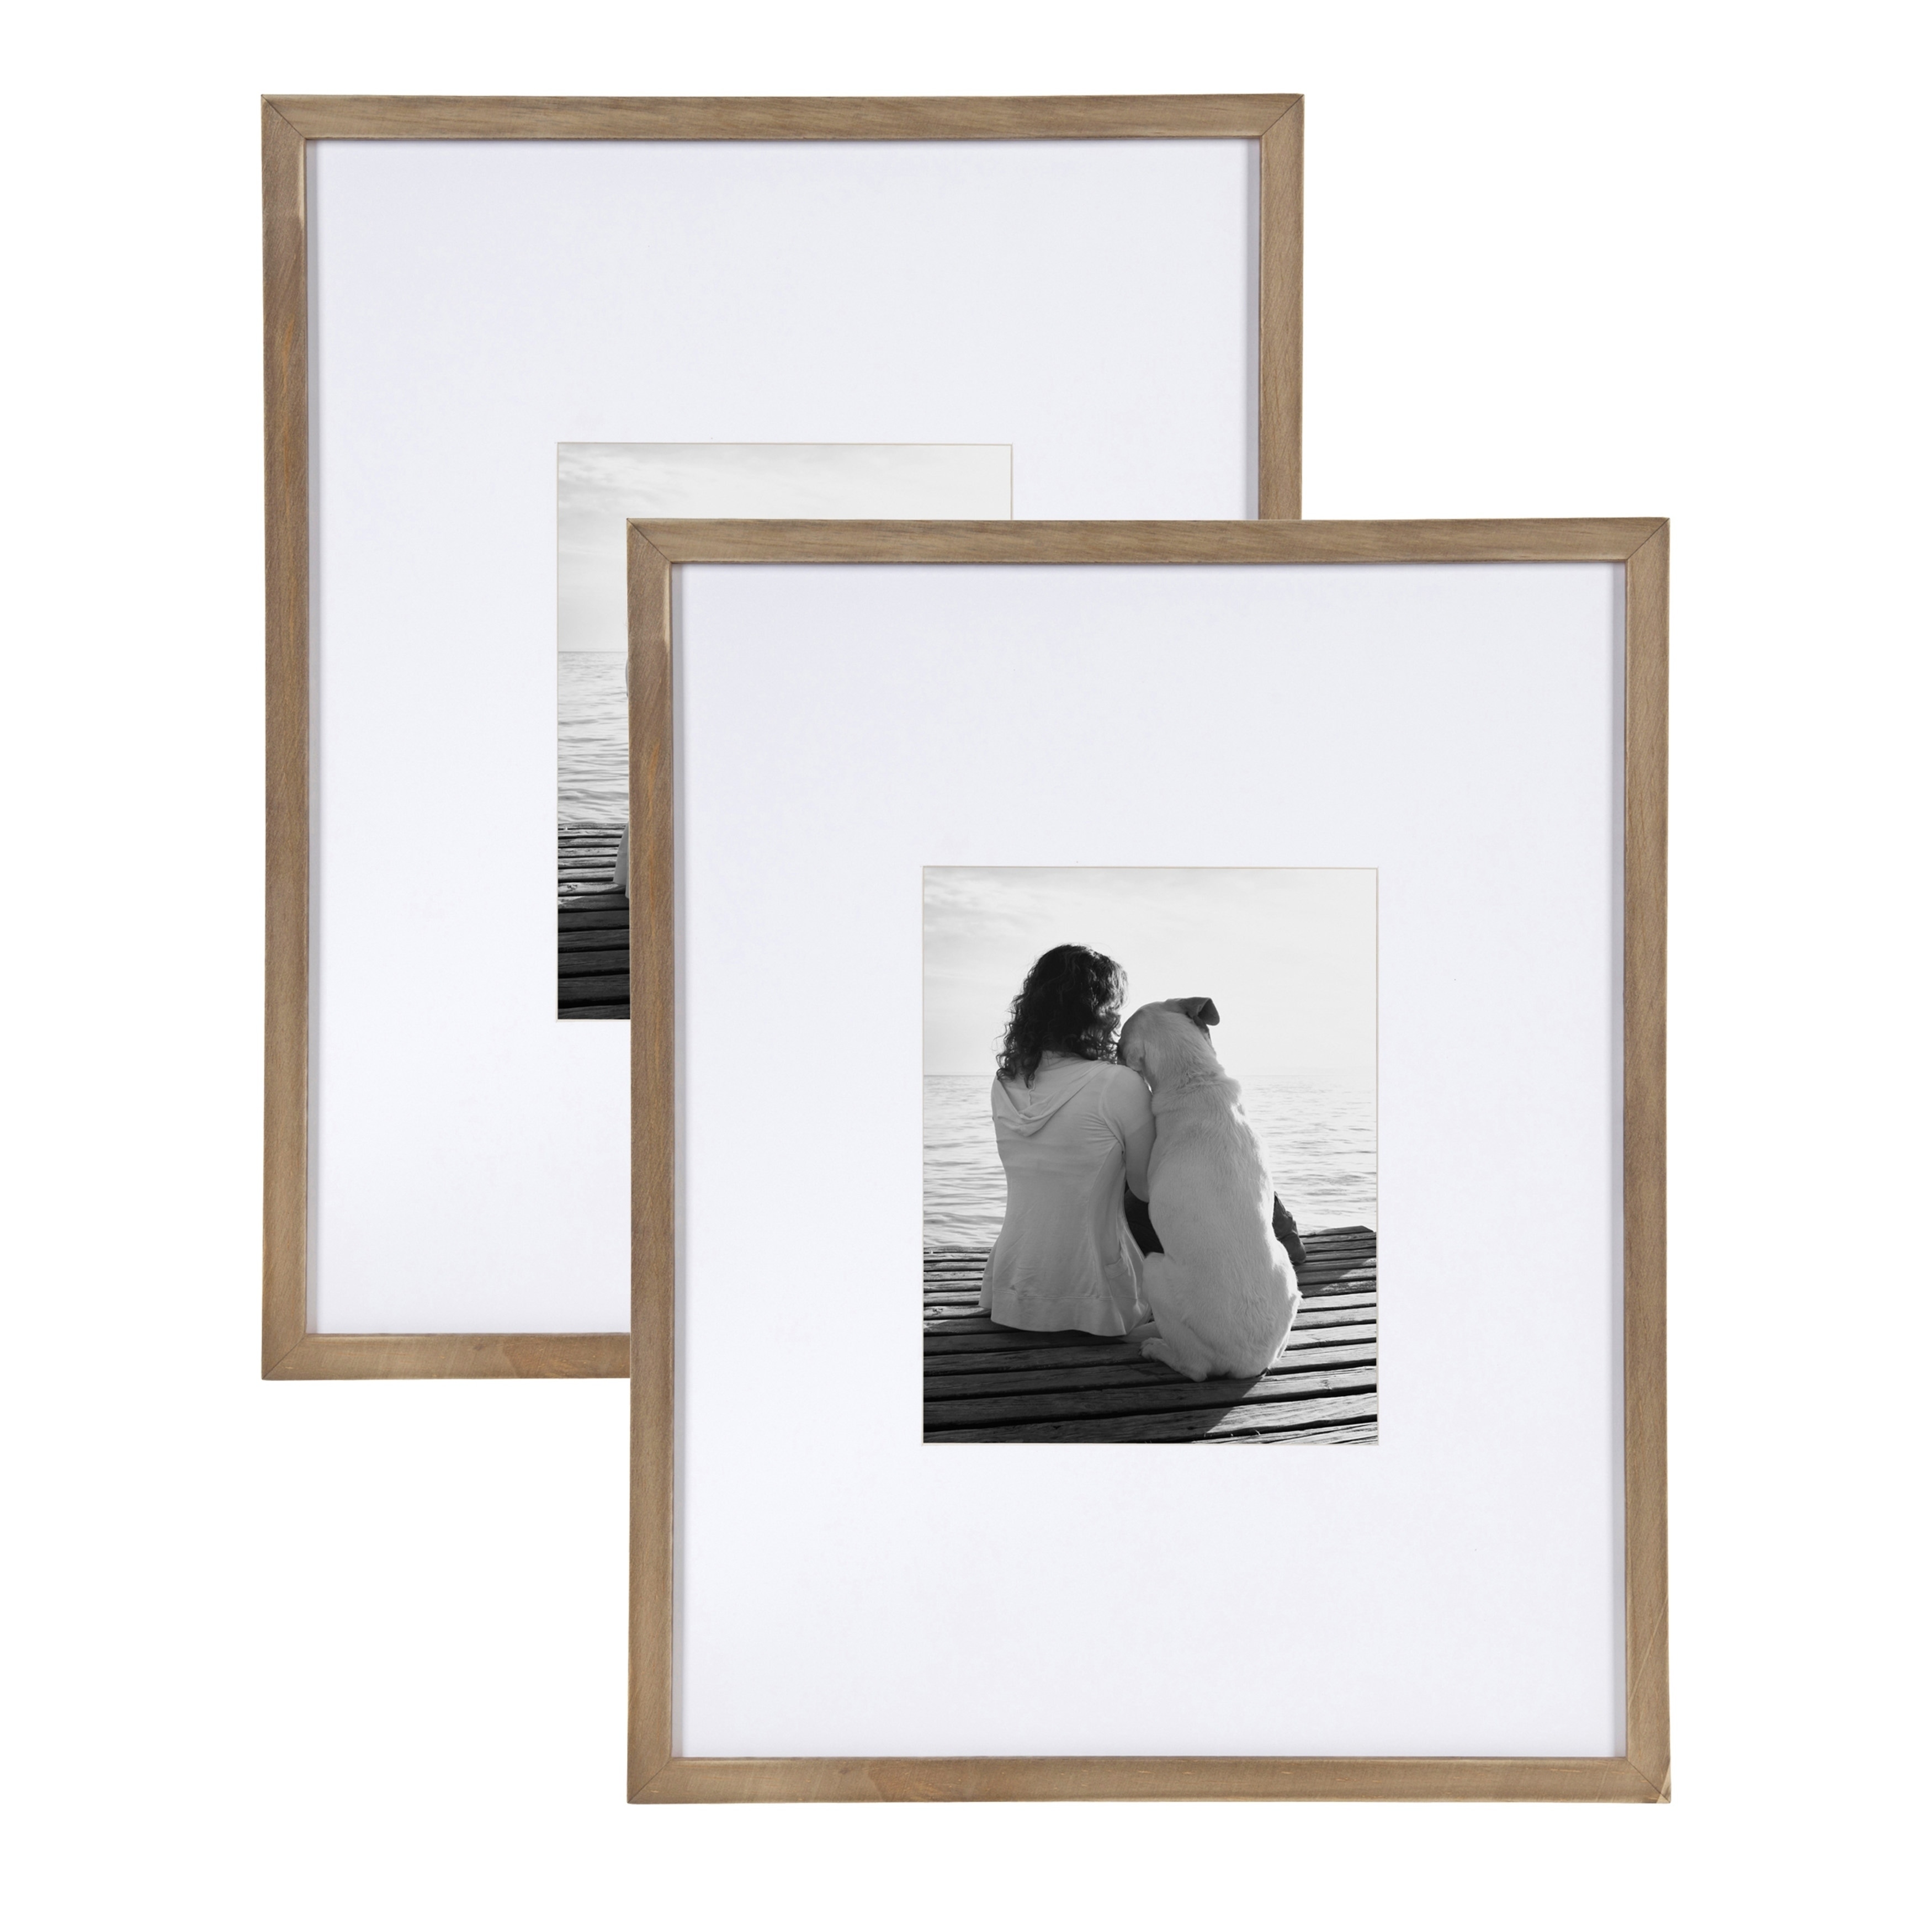 DesignOvation Gallery Wood Wall Picture Frame Walnut Brown (Set of 2) -  16x20 matted to 8x10 - (As Is Item) - Bed Bath & Beyond - 29923753